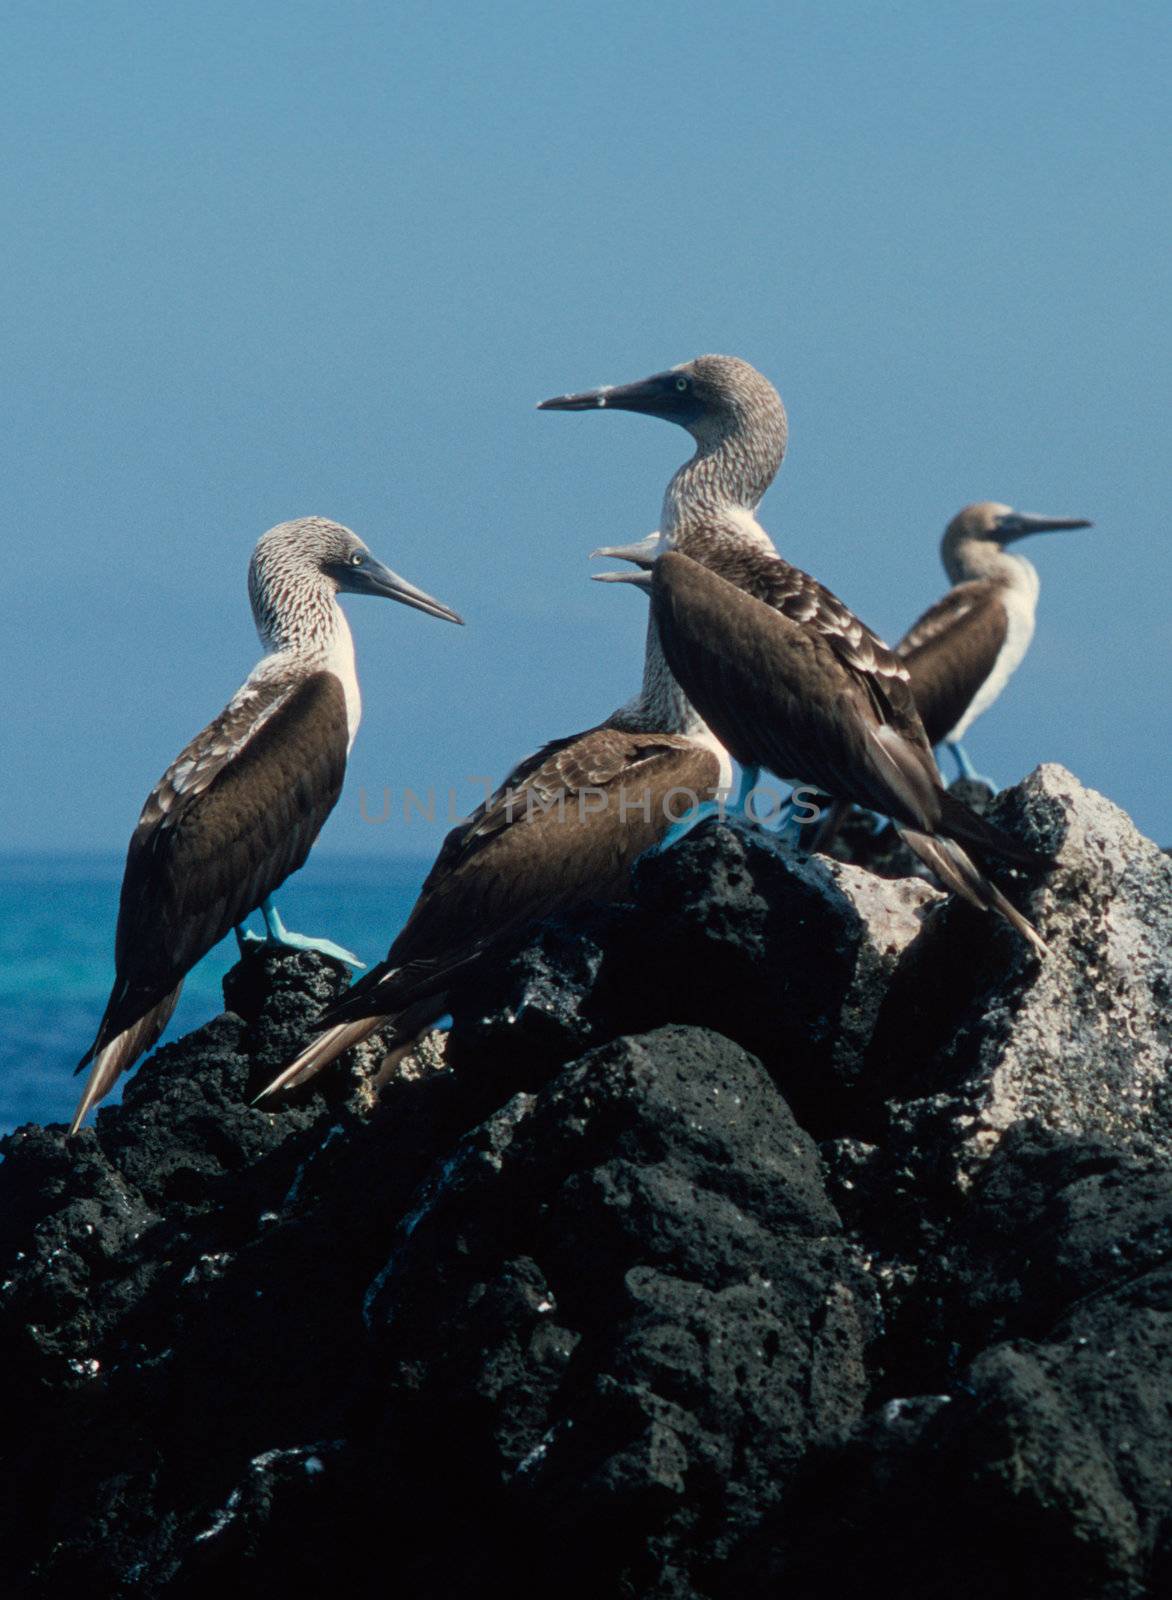 Blue-footed boobies (Sula nebouxii) in the Galapagos Islands